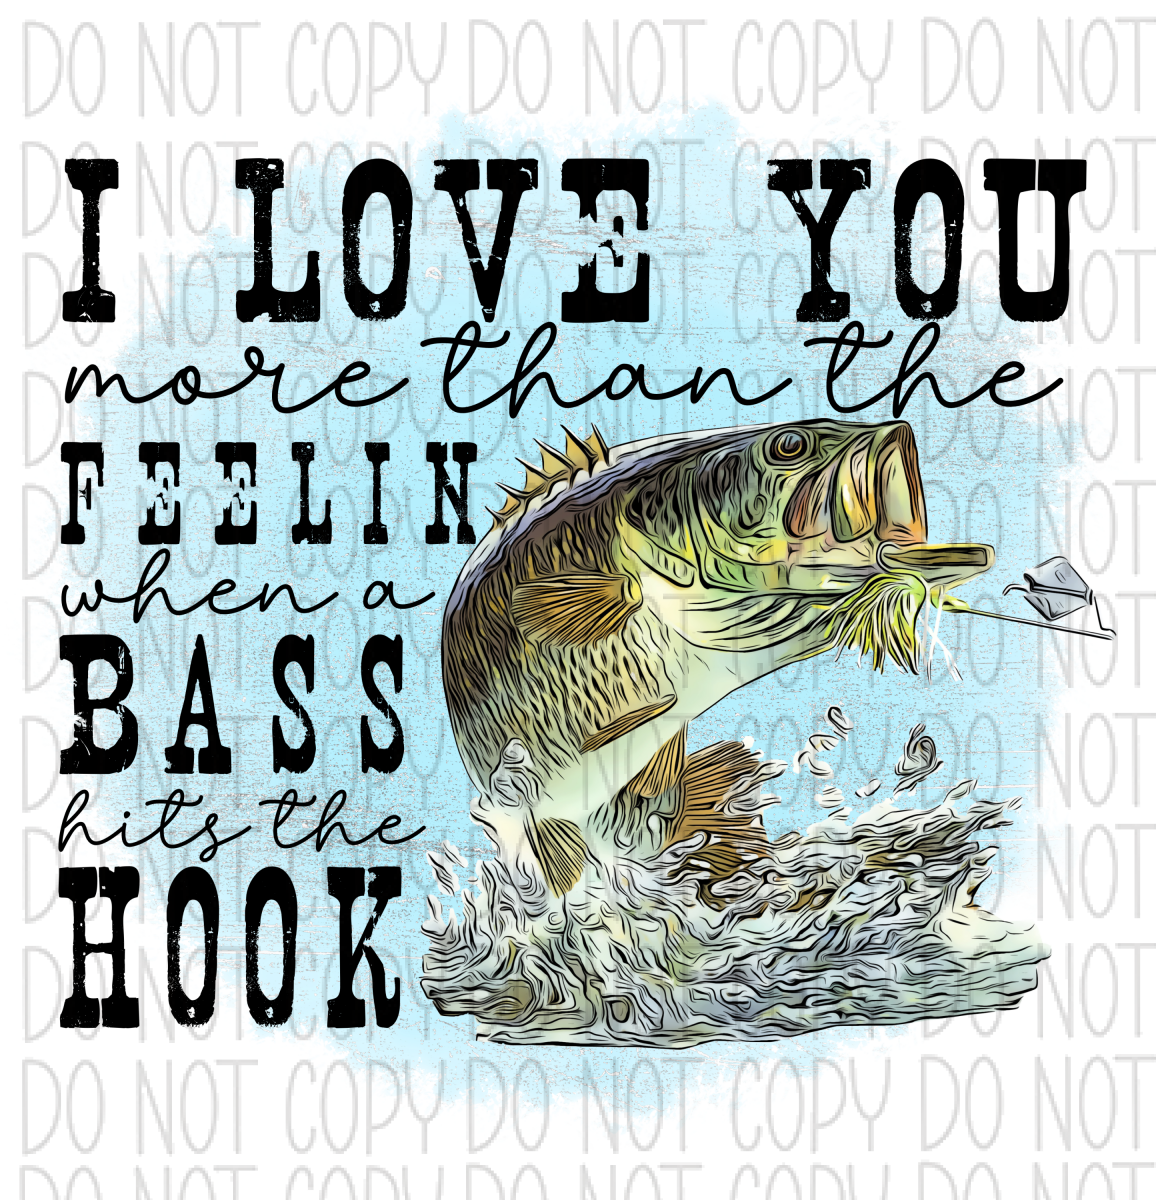 I Love You More Than The Feelin When A Bass Hits Hook Dtf Transfer